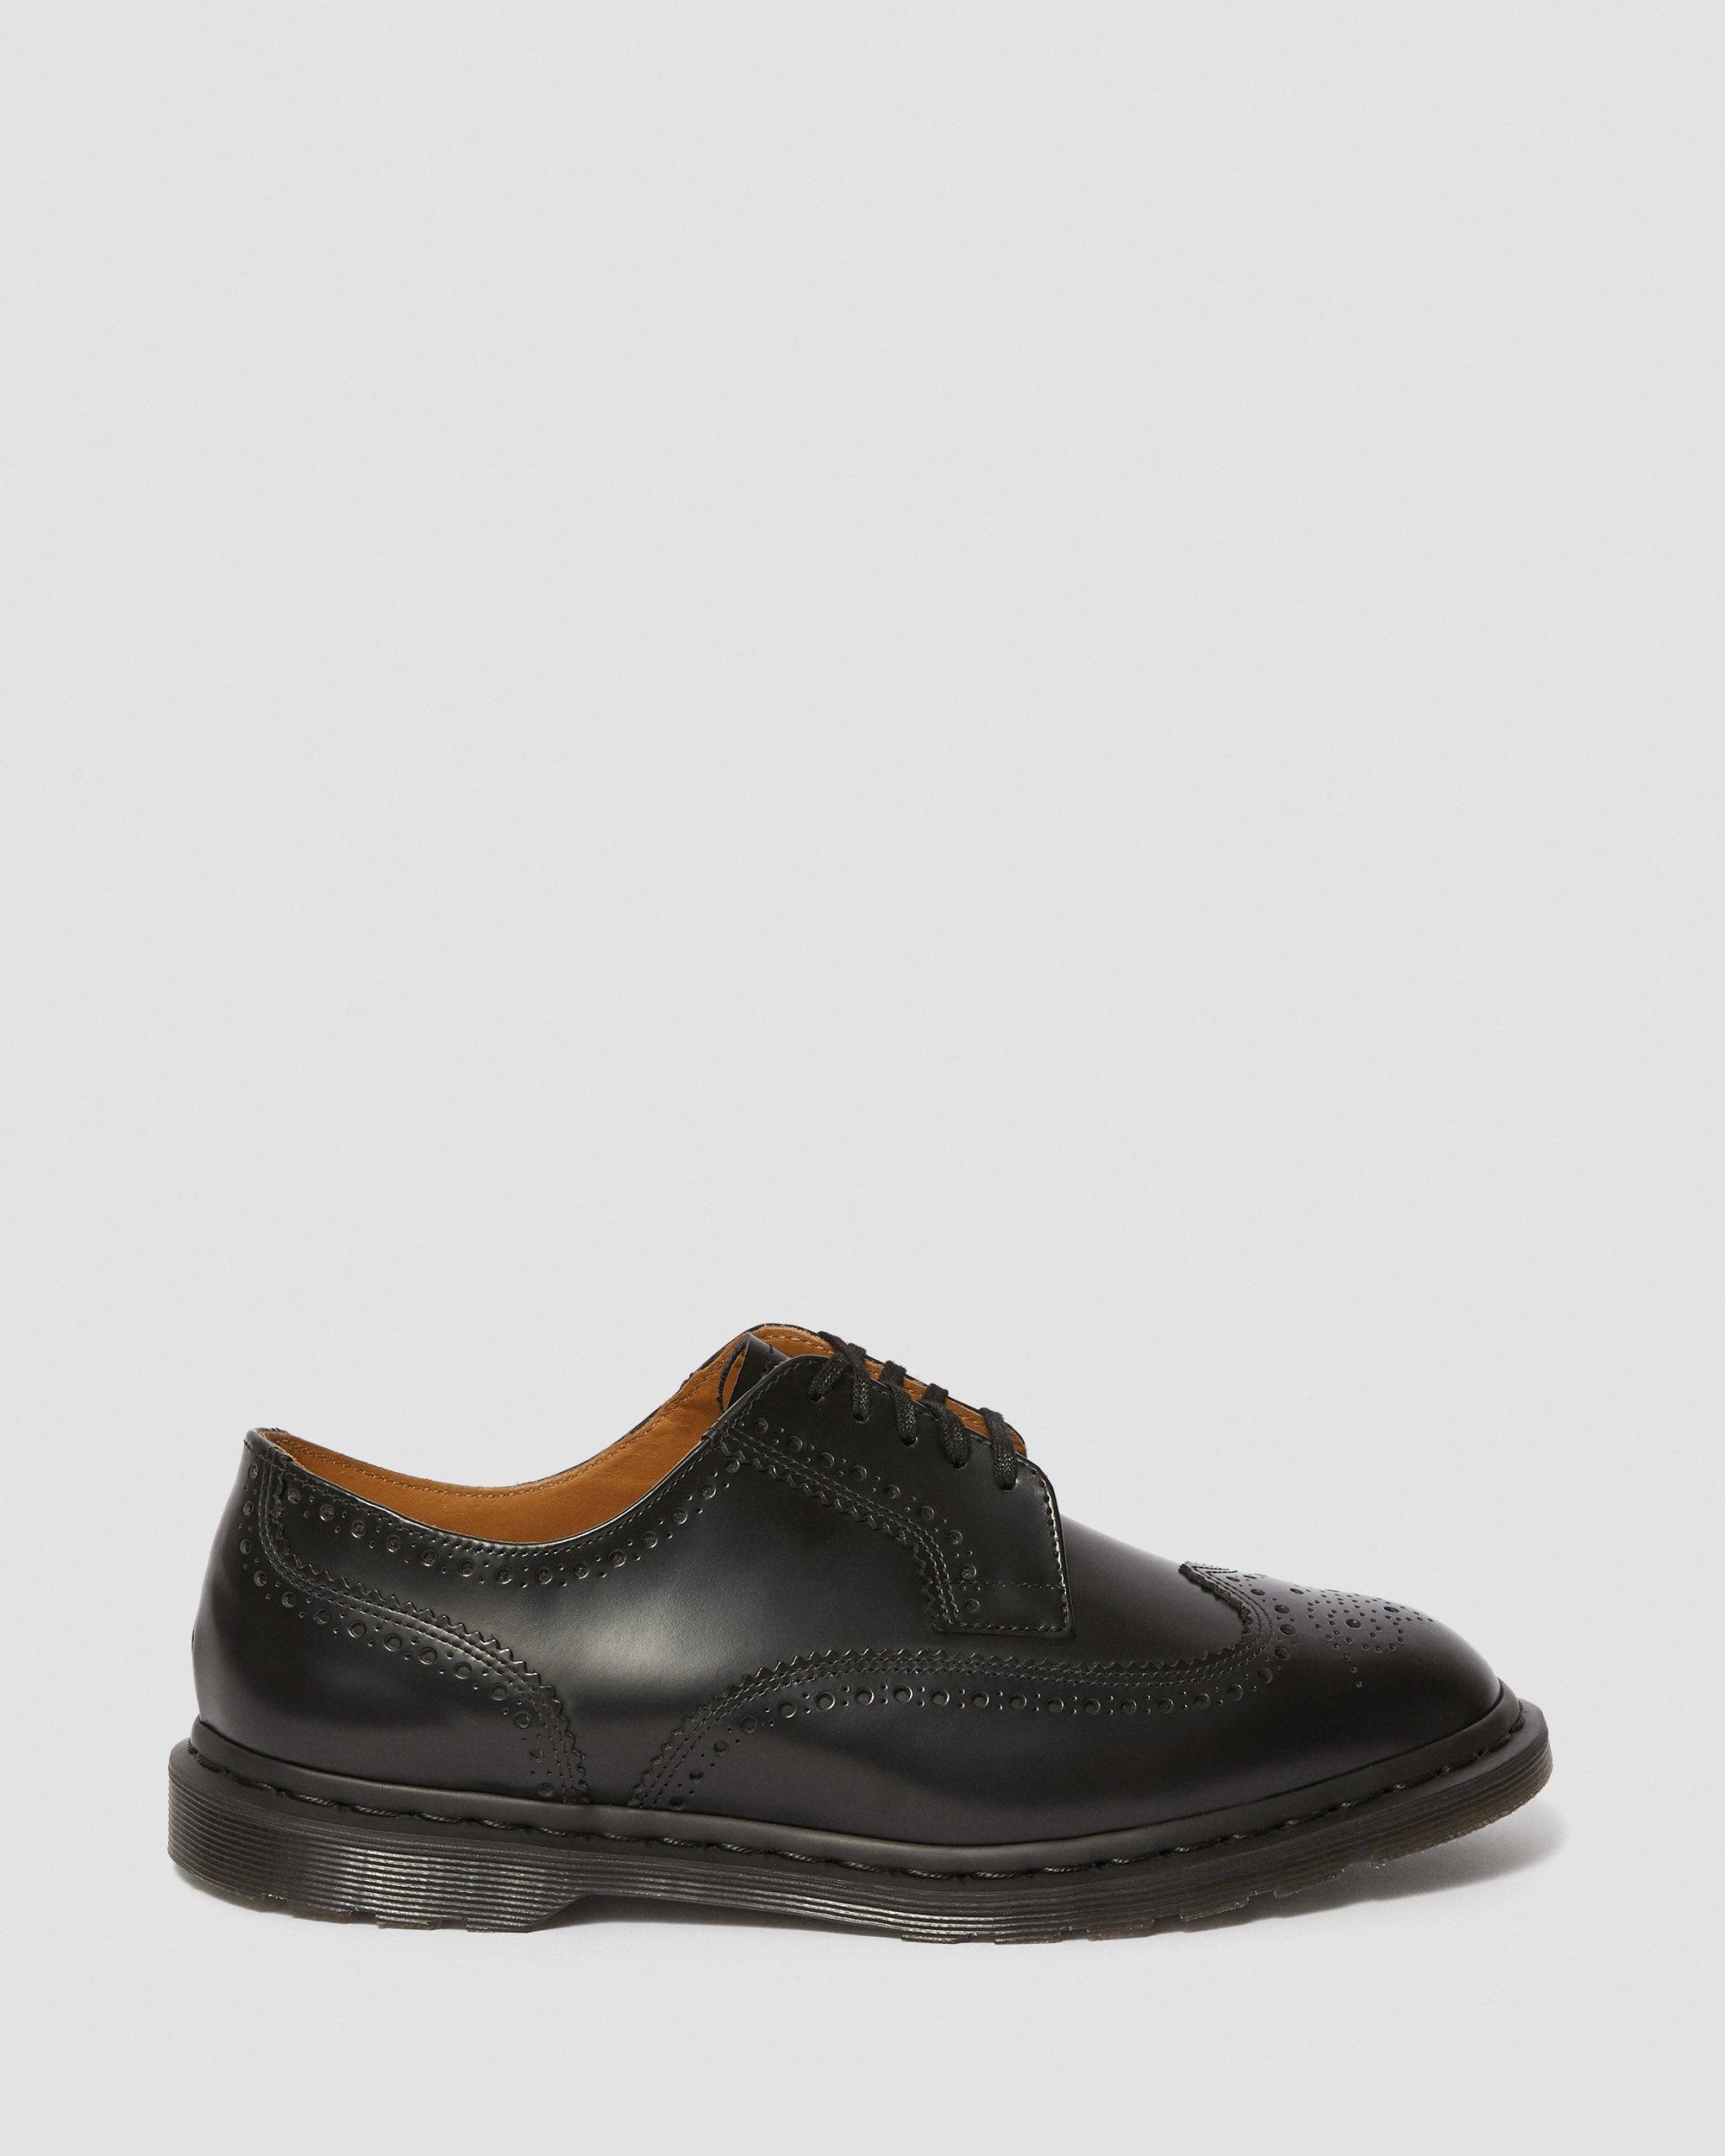 KELVIN II SMOOTH LEATHER BROGUE SHOES | Dr. Martens